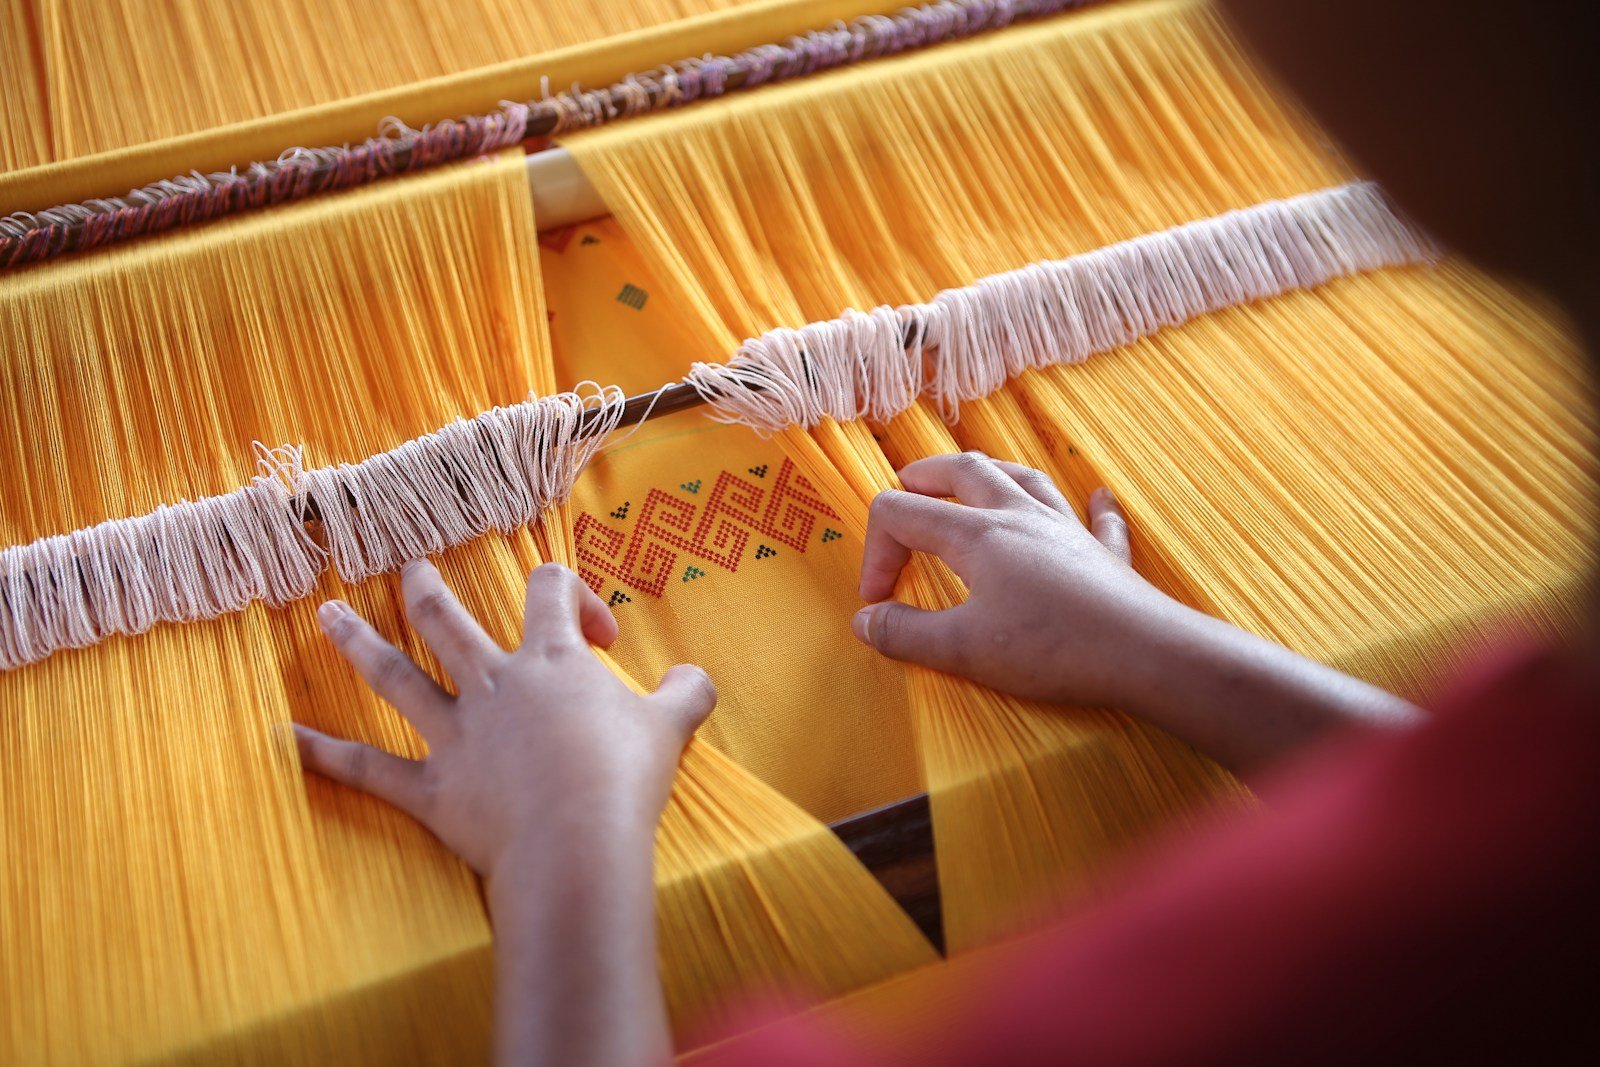 Revival of Traditional Crafts in the Modern World